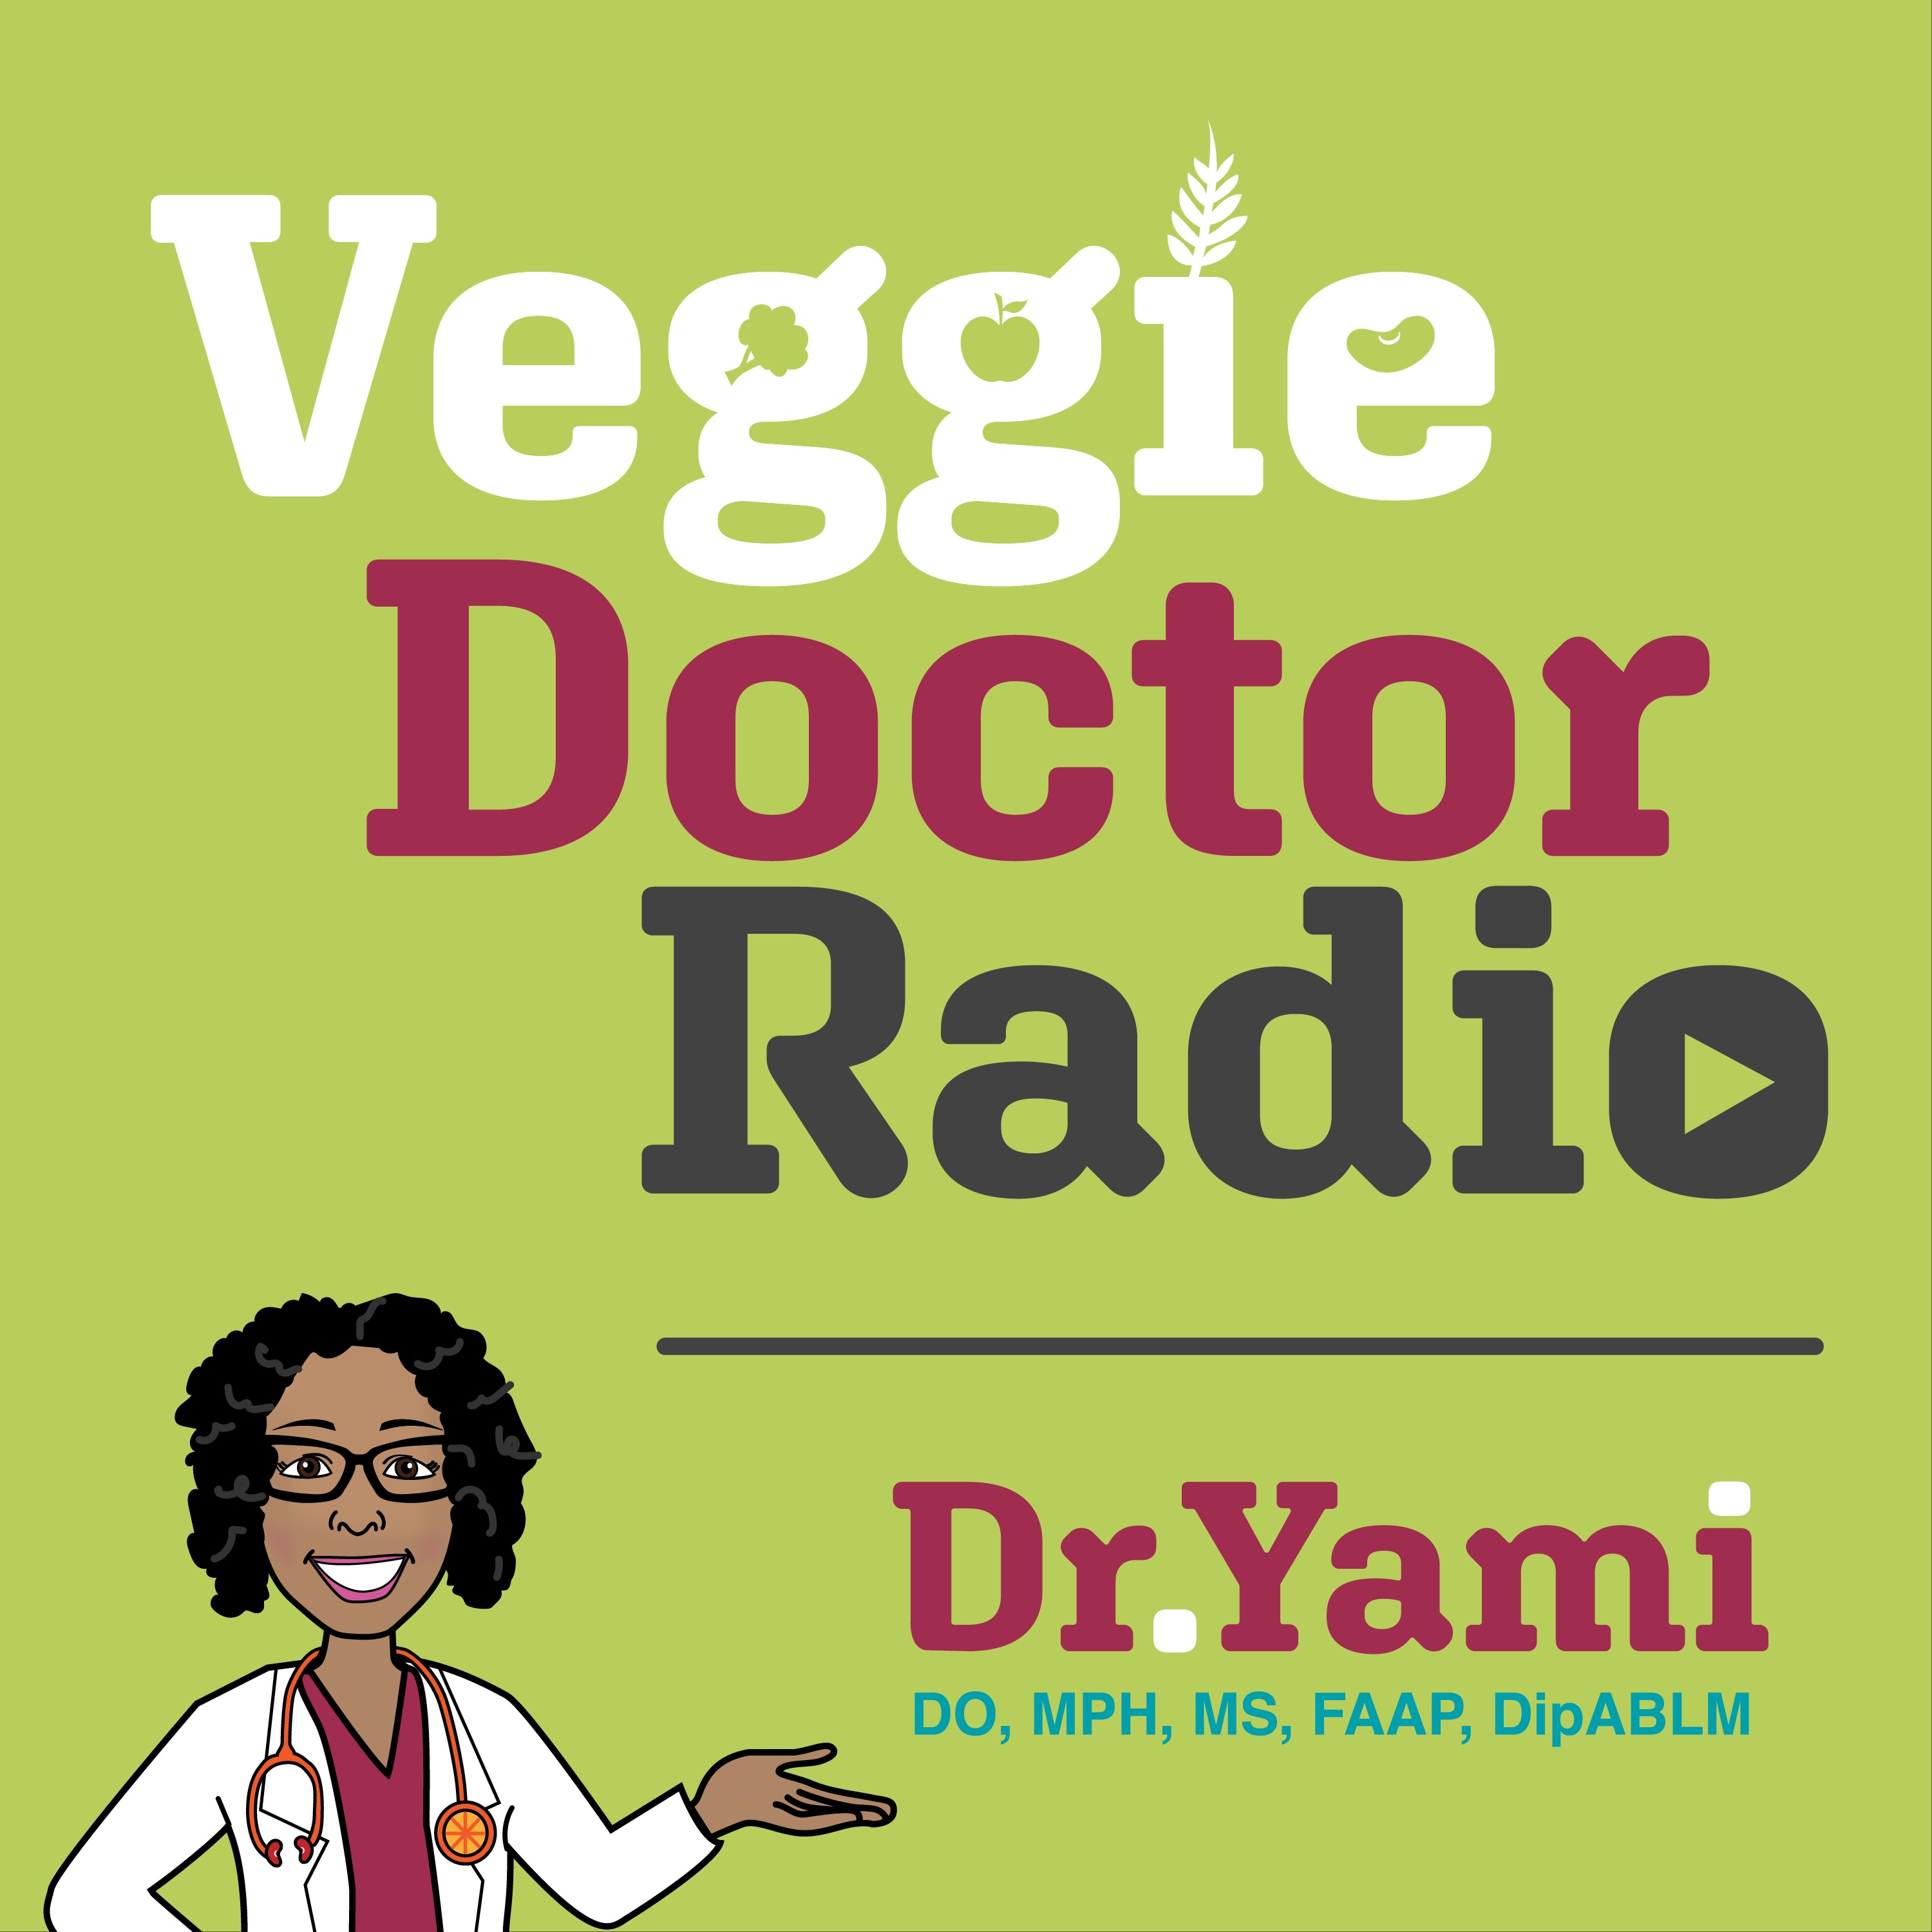 184: Listen to this before you start a diet (Veggie Doctor Radio)